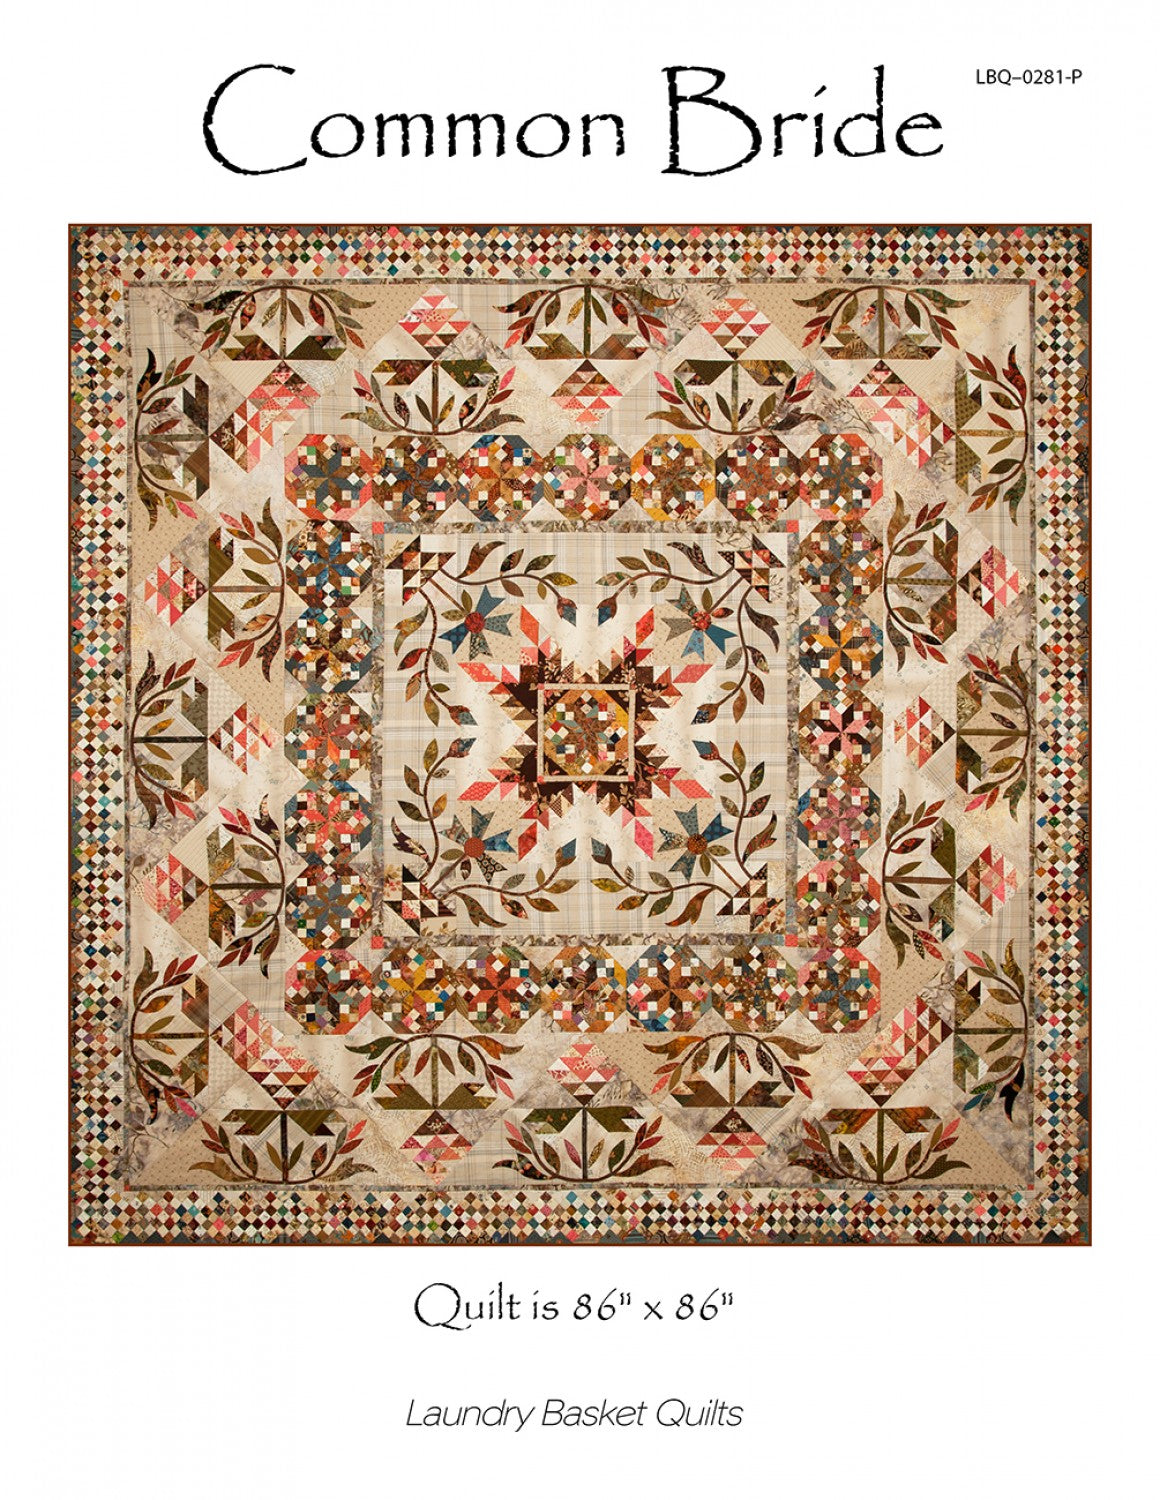 Common Bride Quilt Pattern by Edyta Sitar of Laundry Basket Quilts